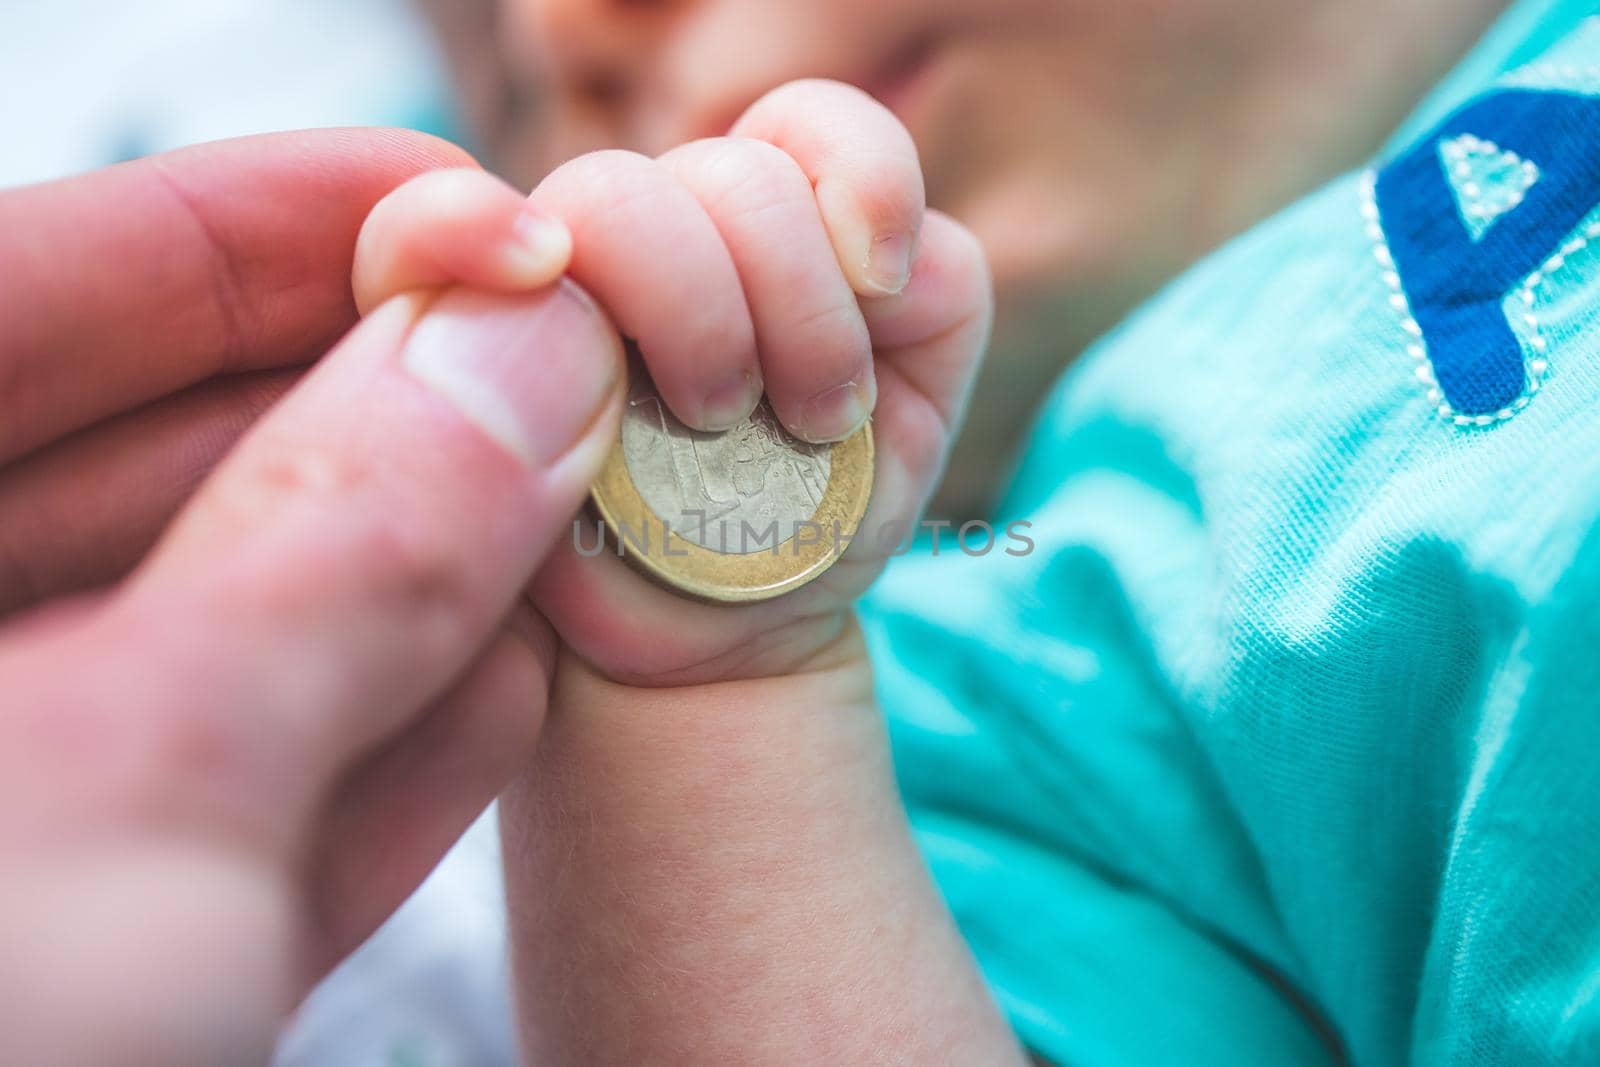 Old age insurance baby concept: Close up of newborn baby holding a coin by Daxenbichler